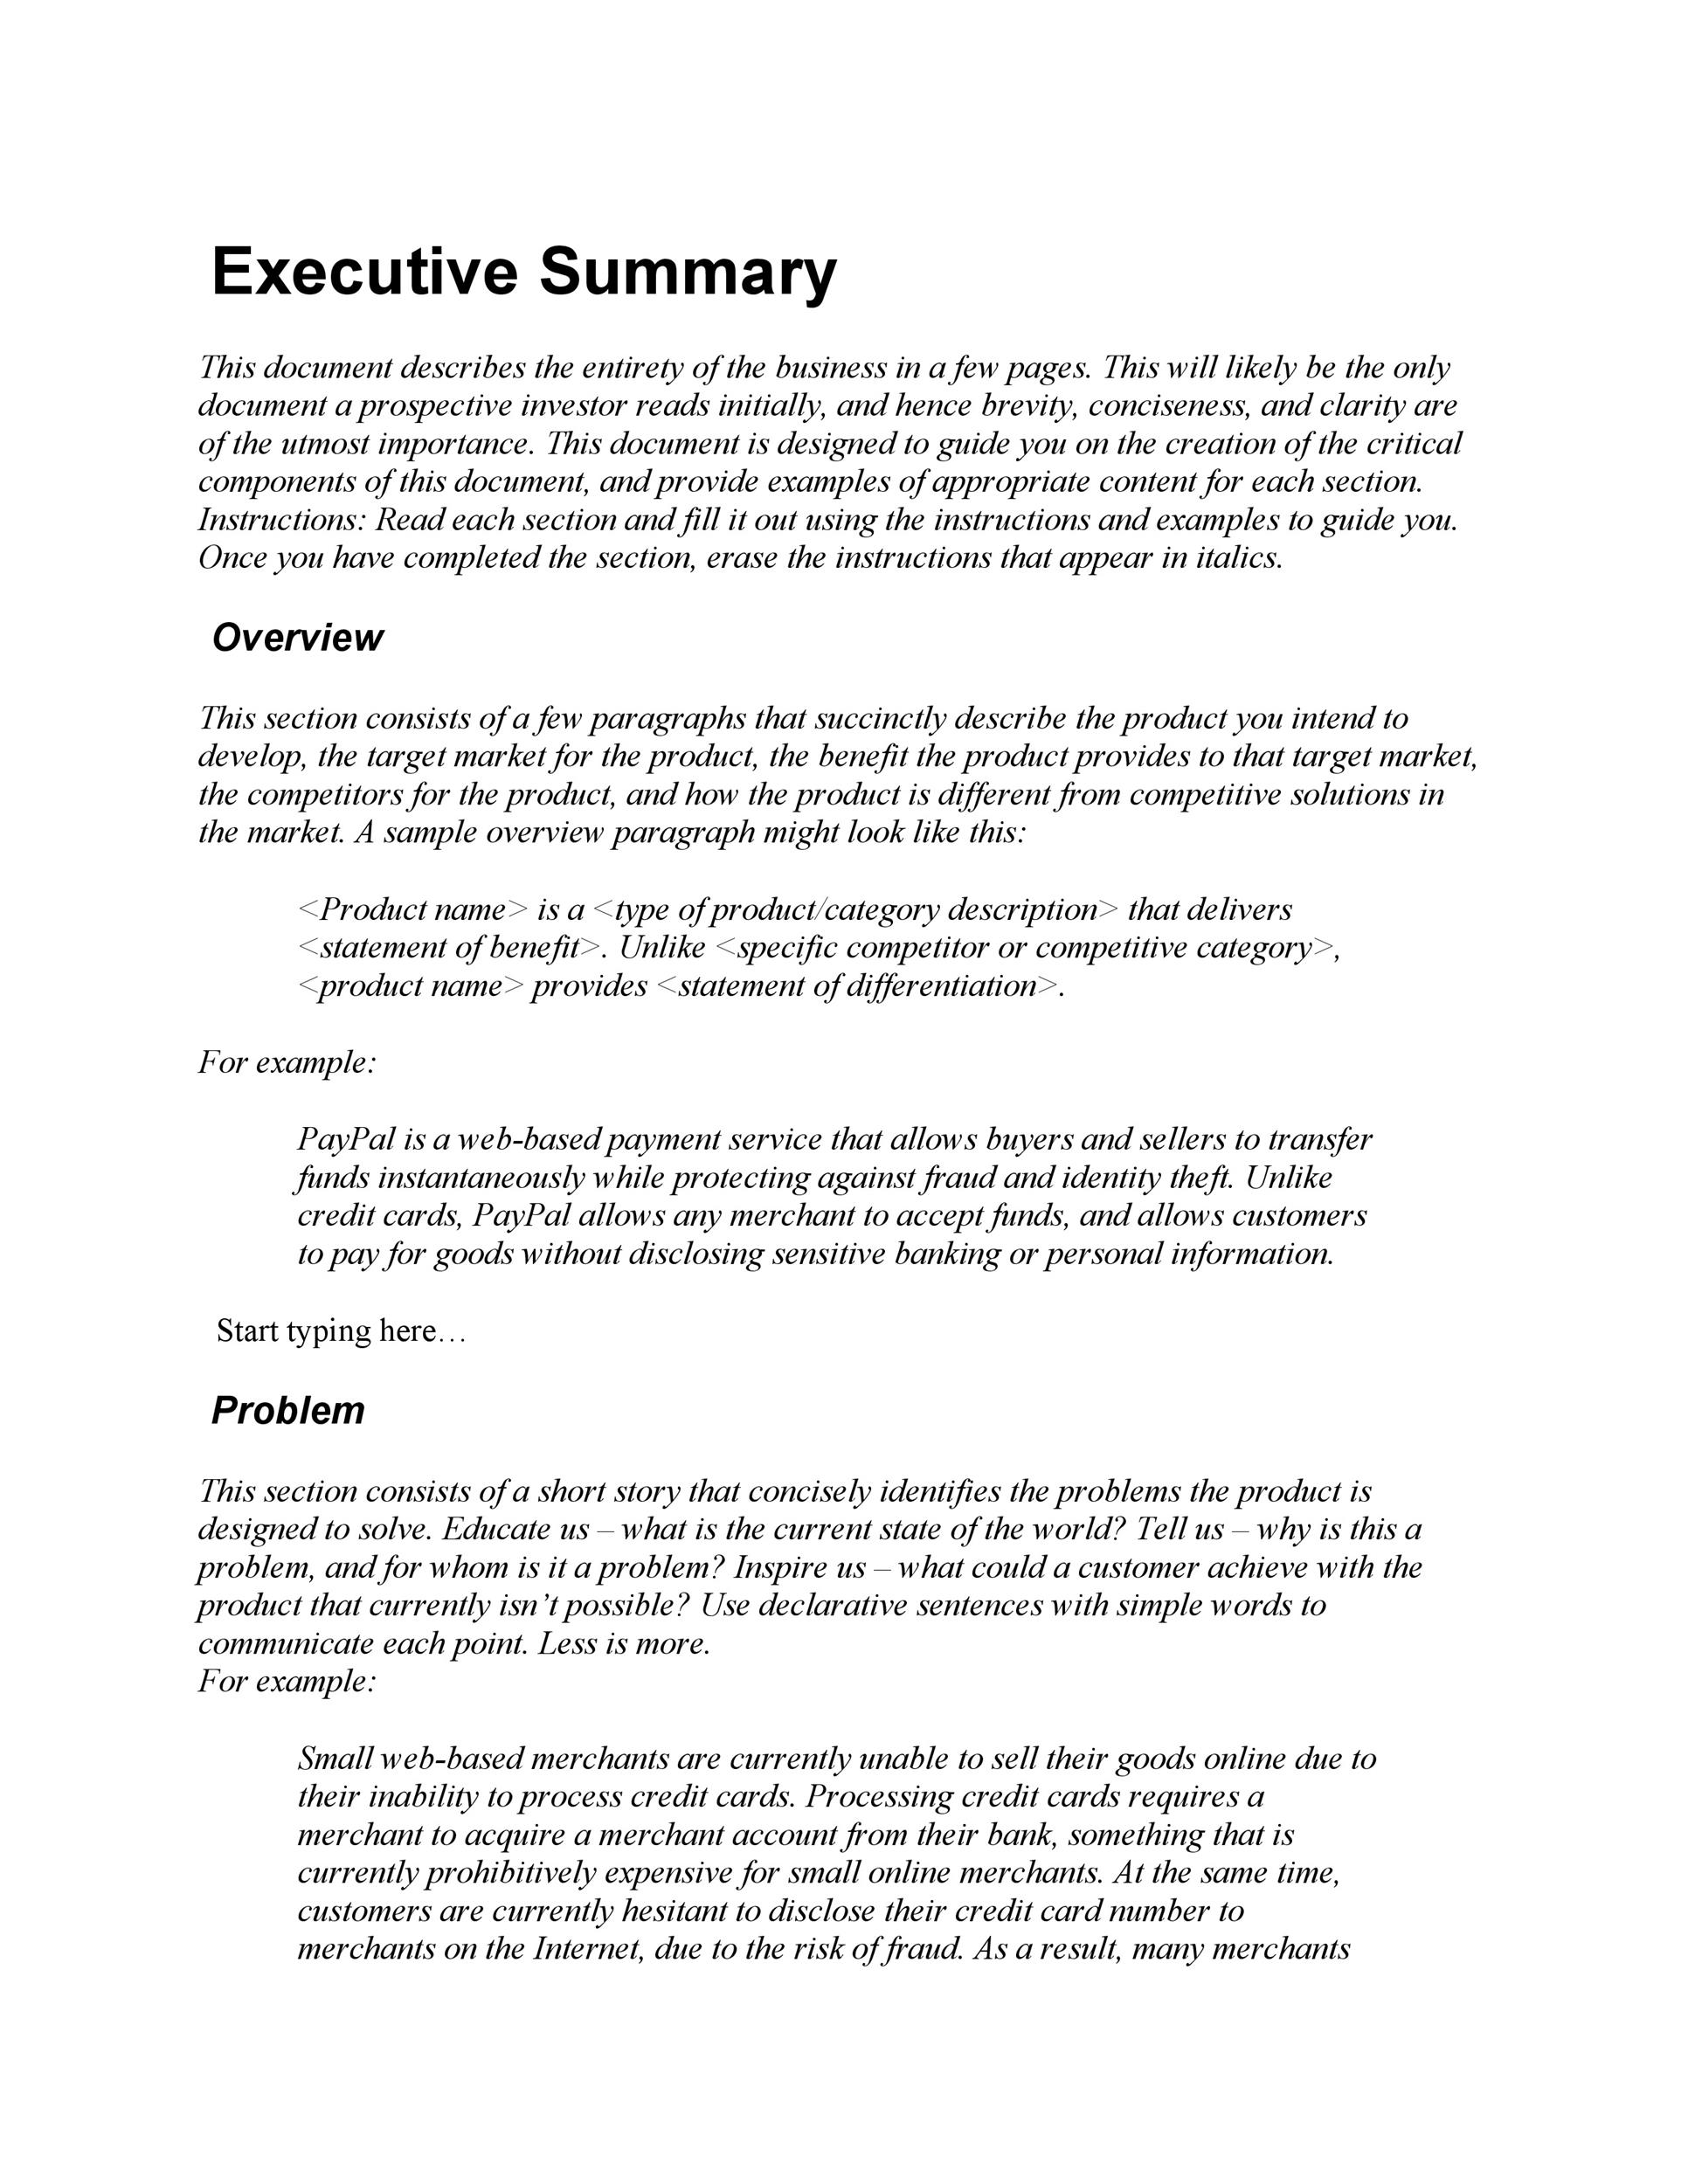 ​How to Write an Executive Summary for Your Proposal